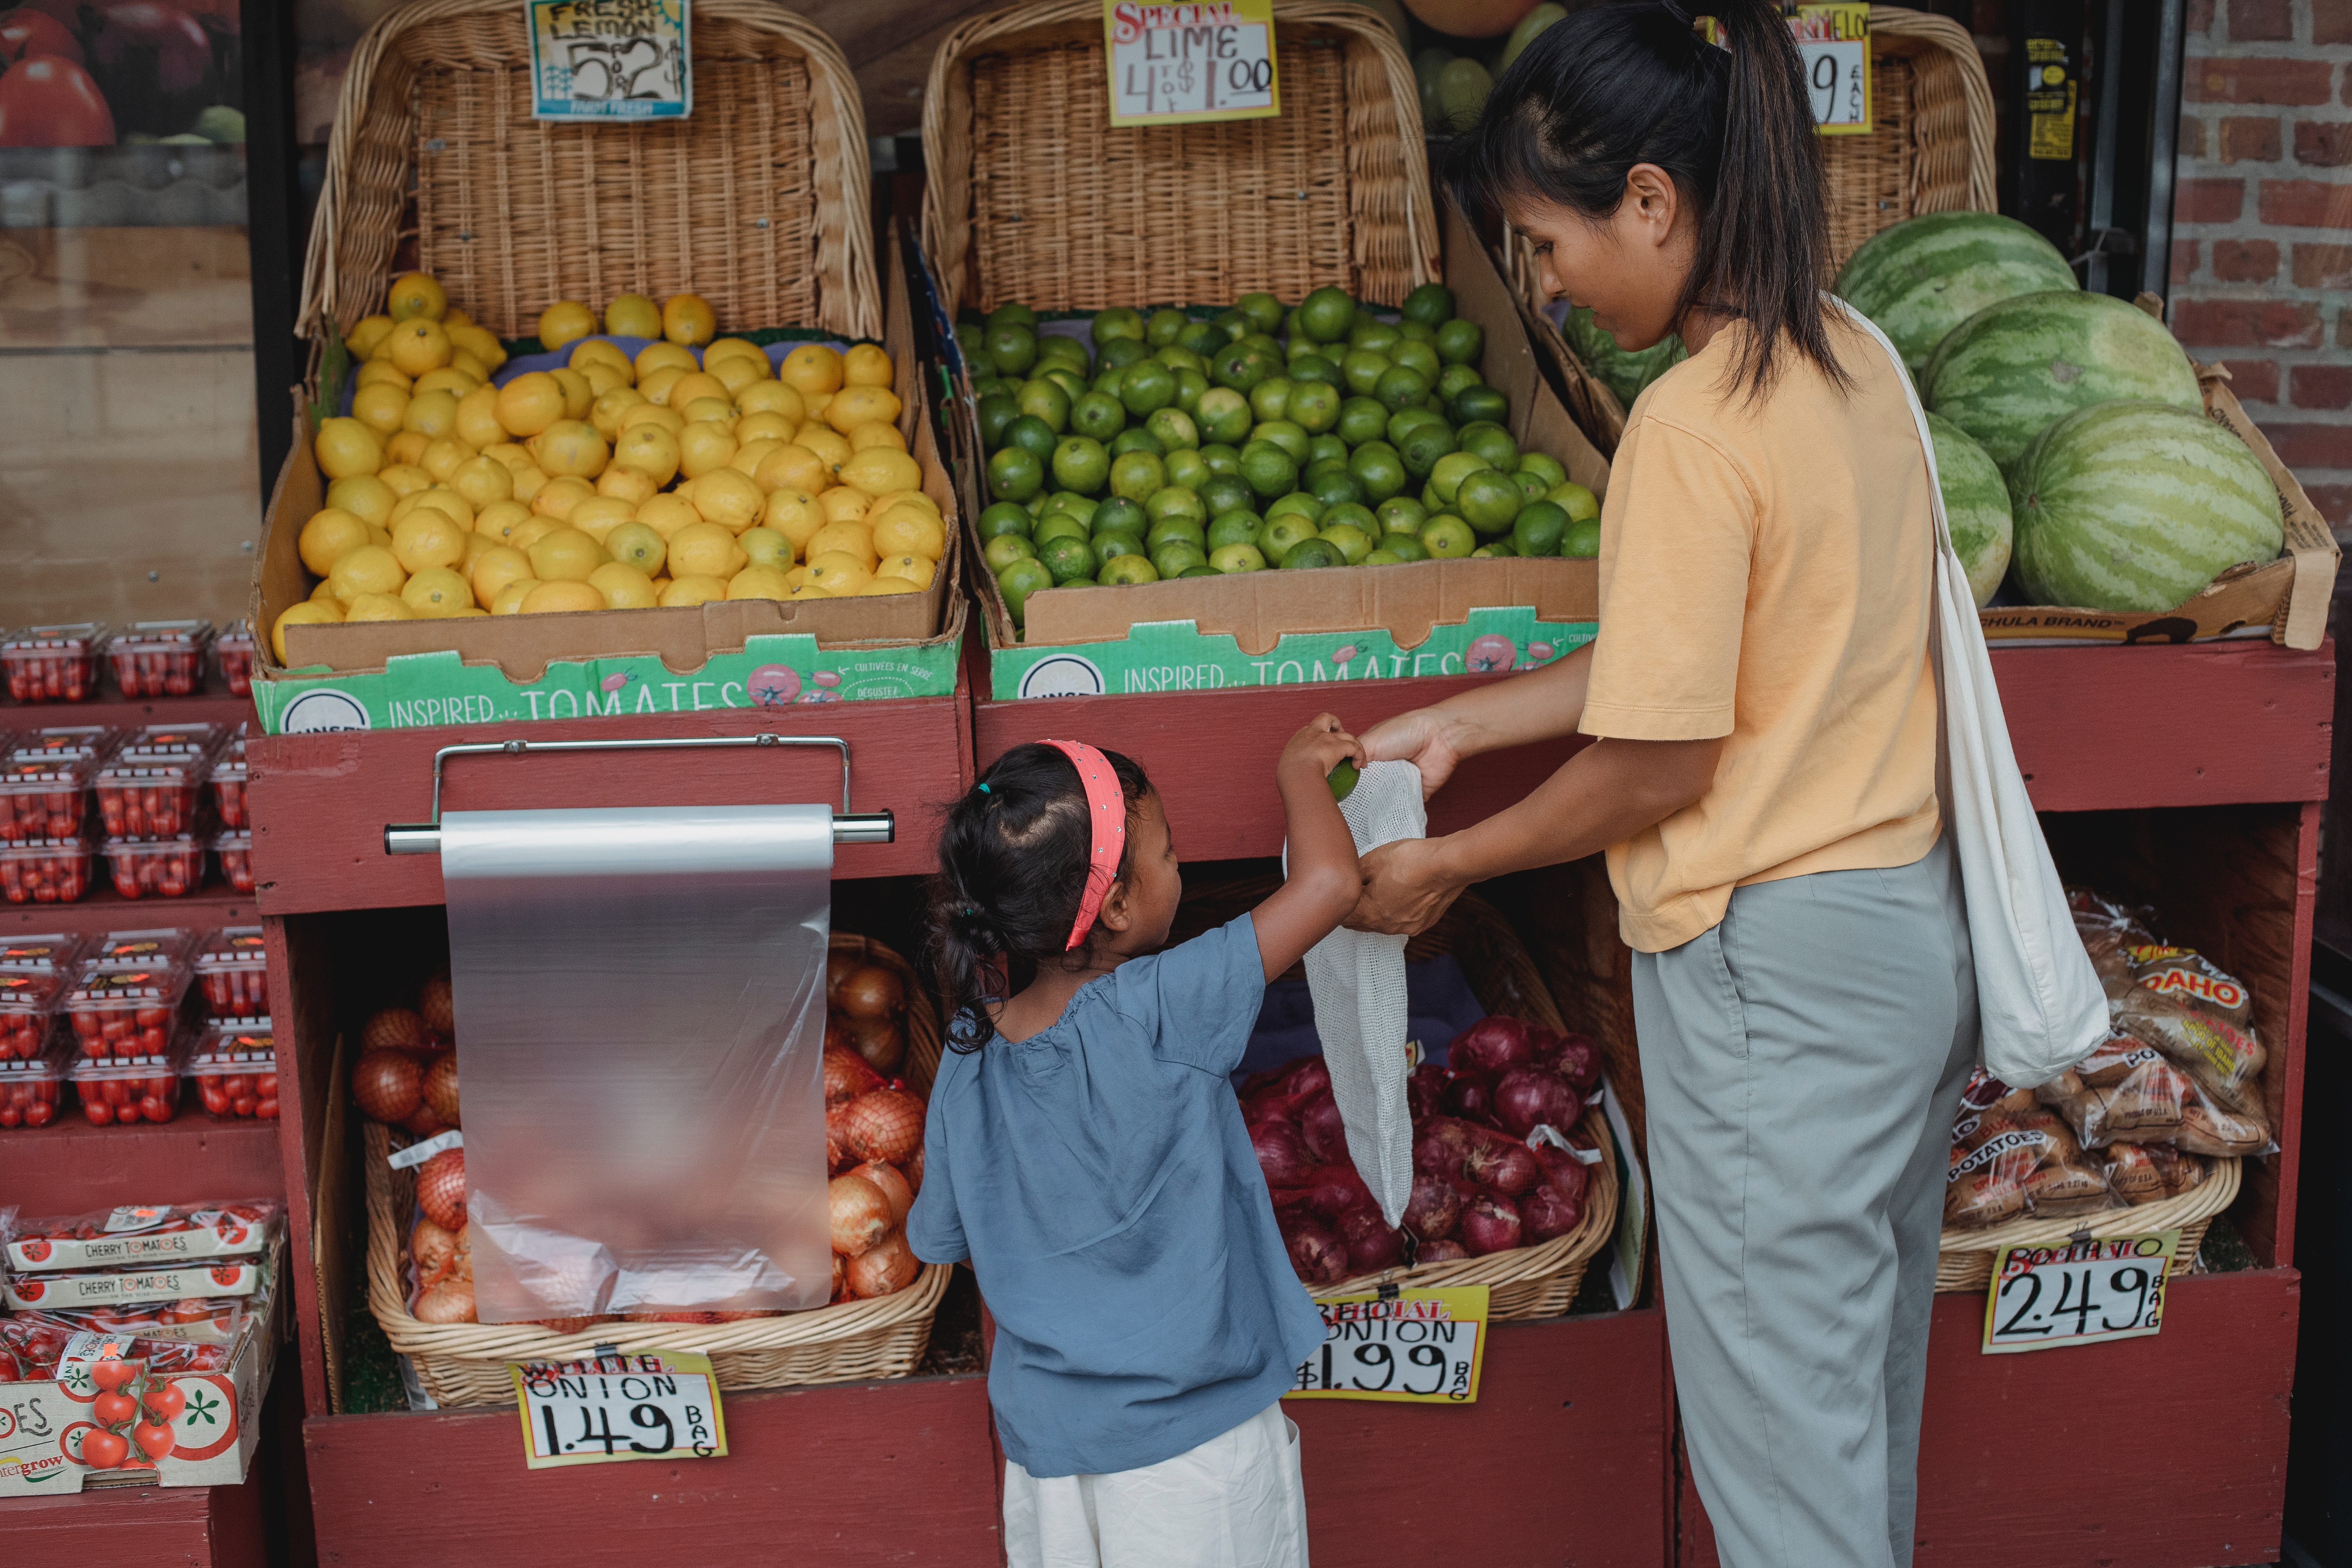 A little girl and her mom shopping in a fruit market